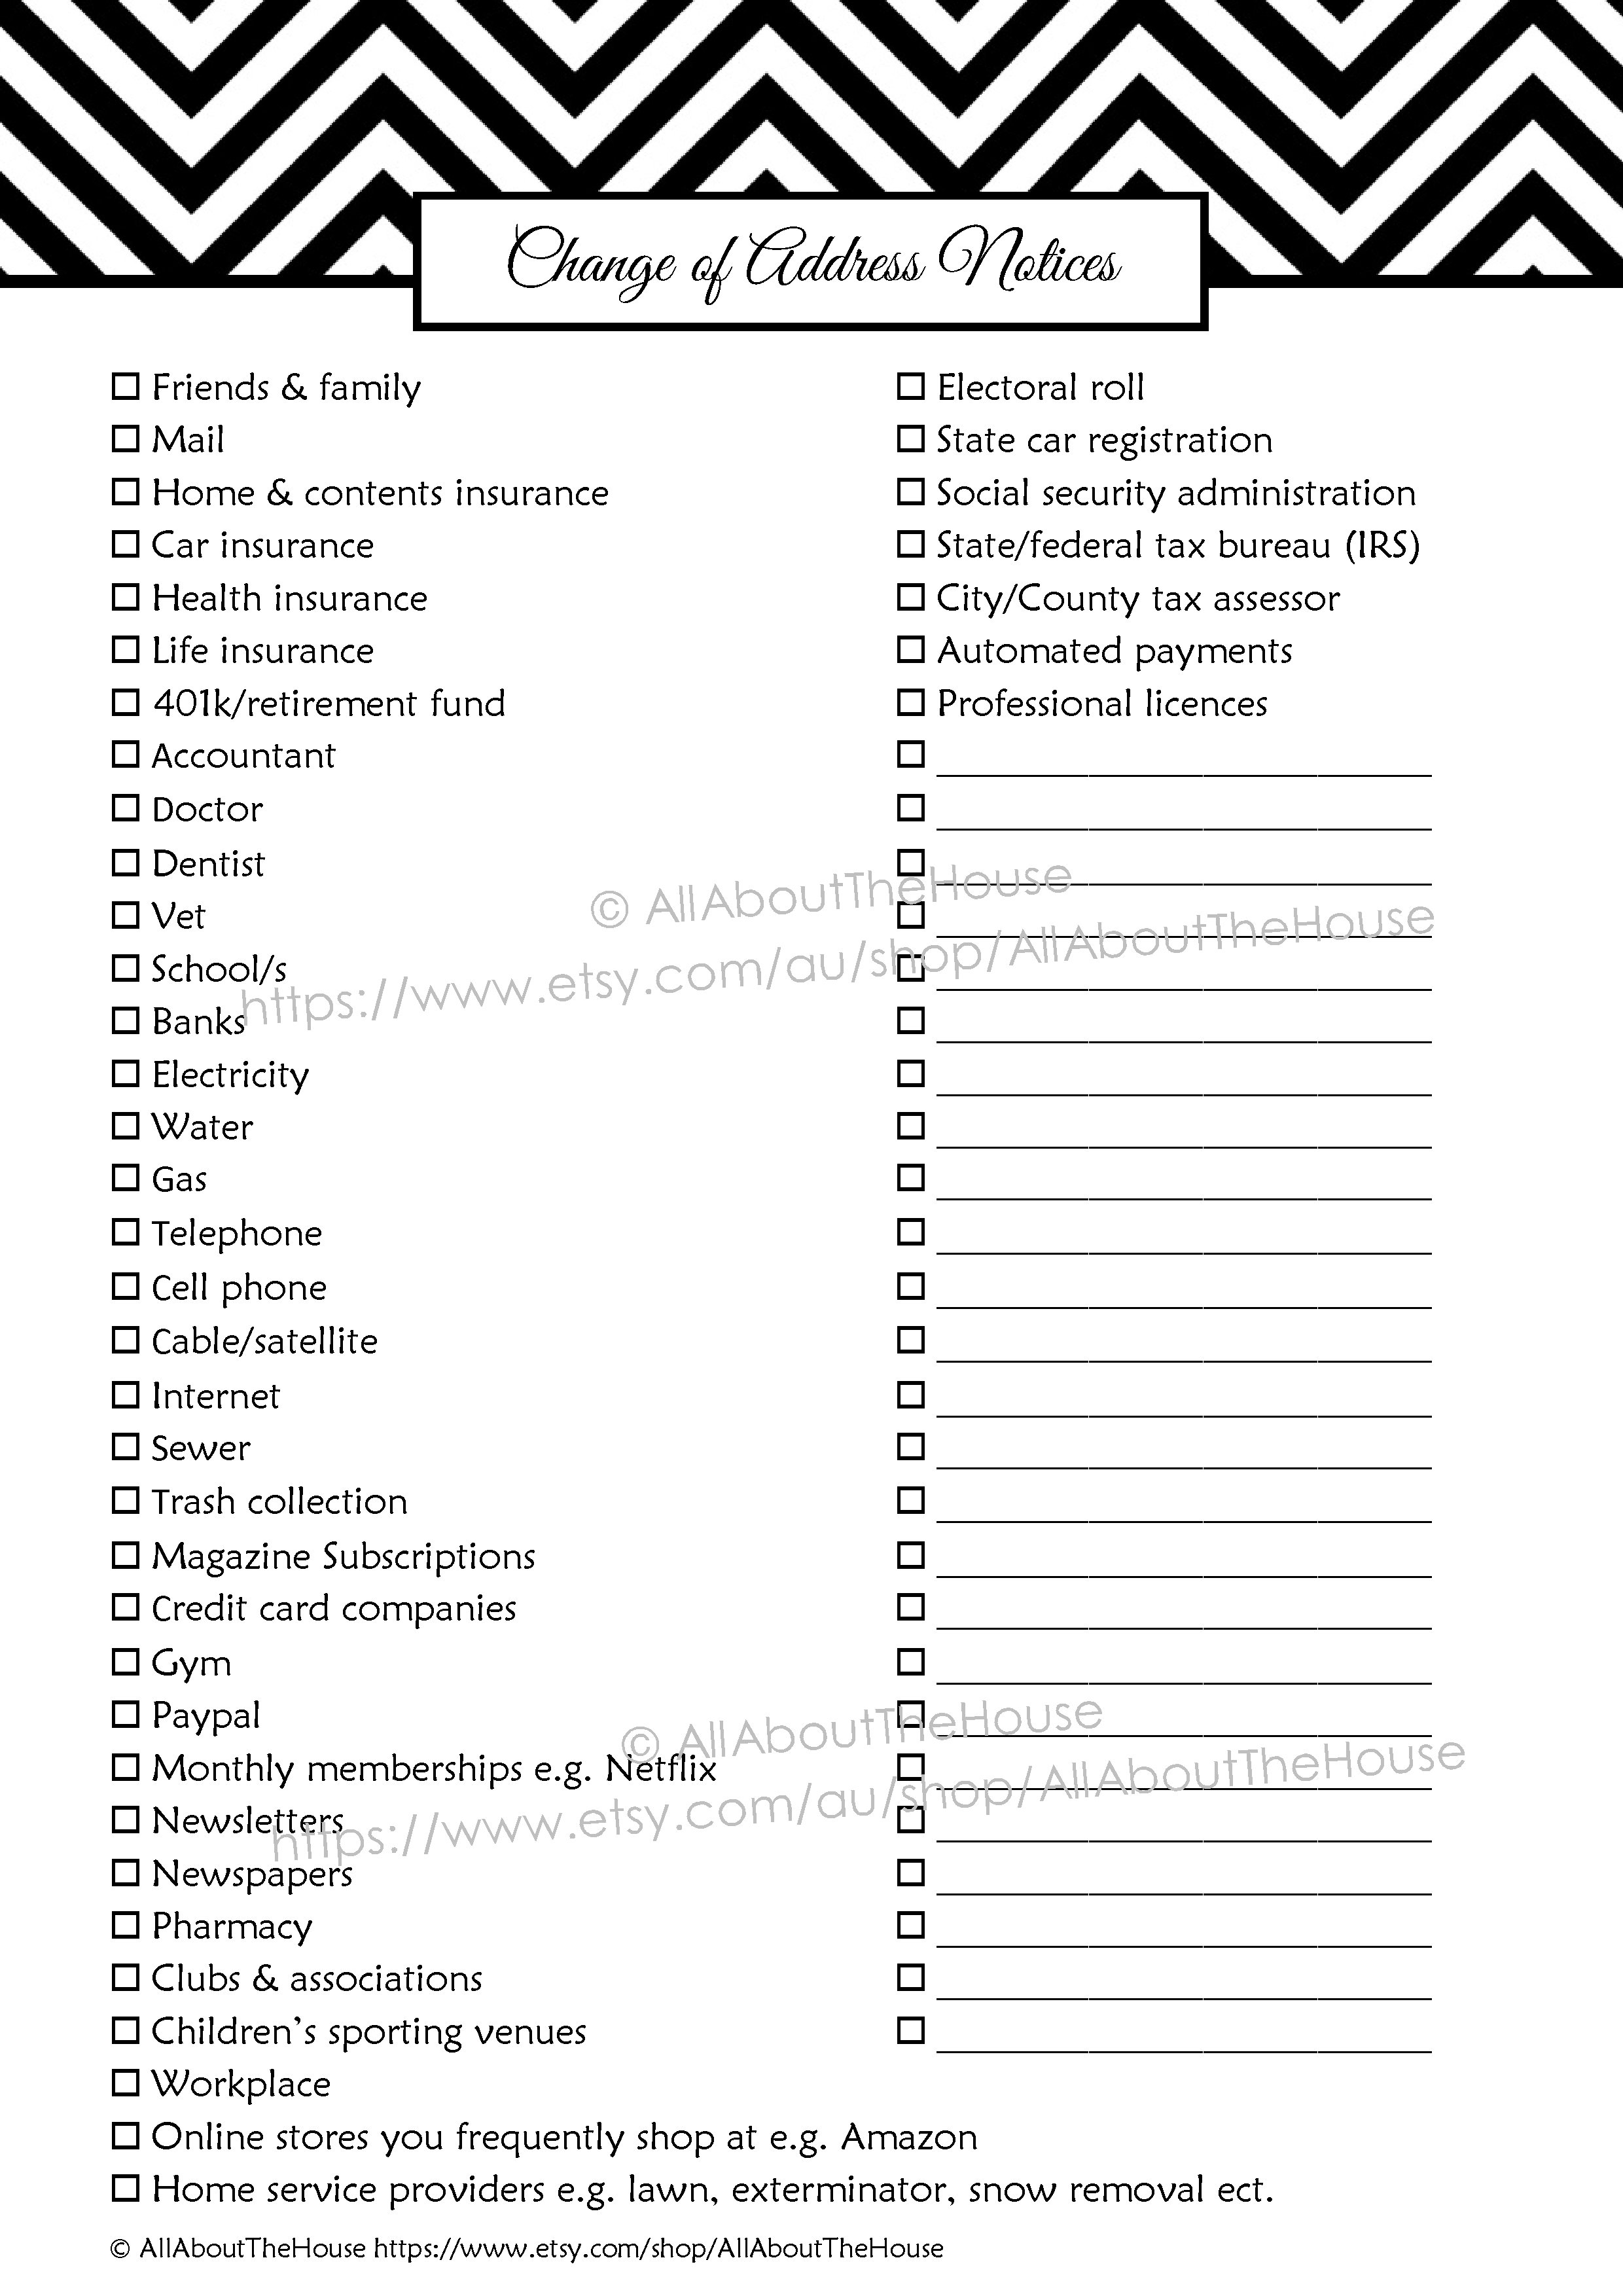 change-of-address-notices-checklist-allaboutthehouse-printables